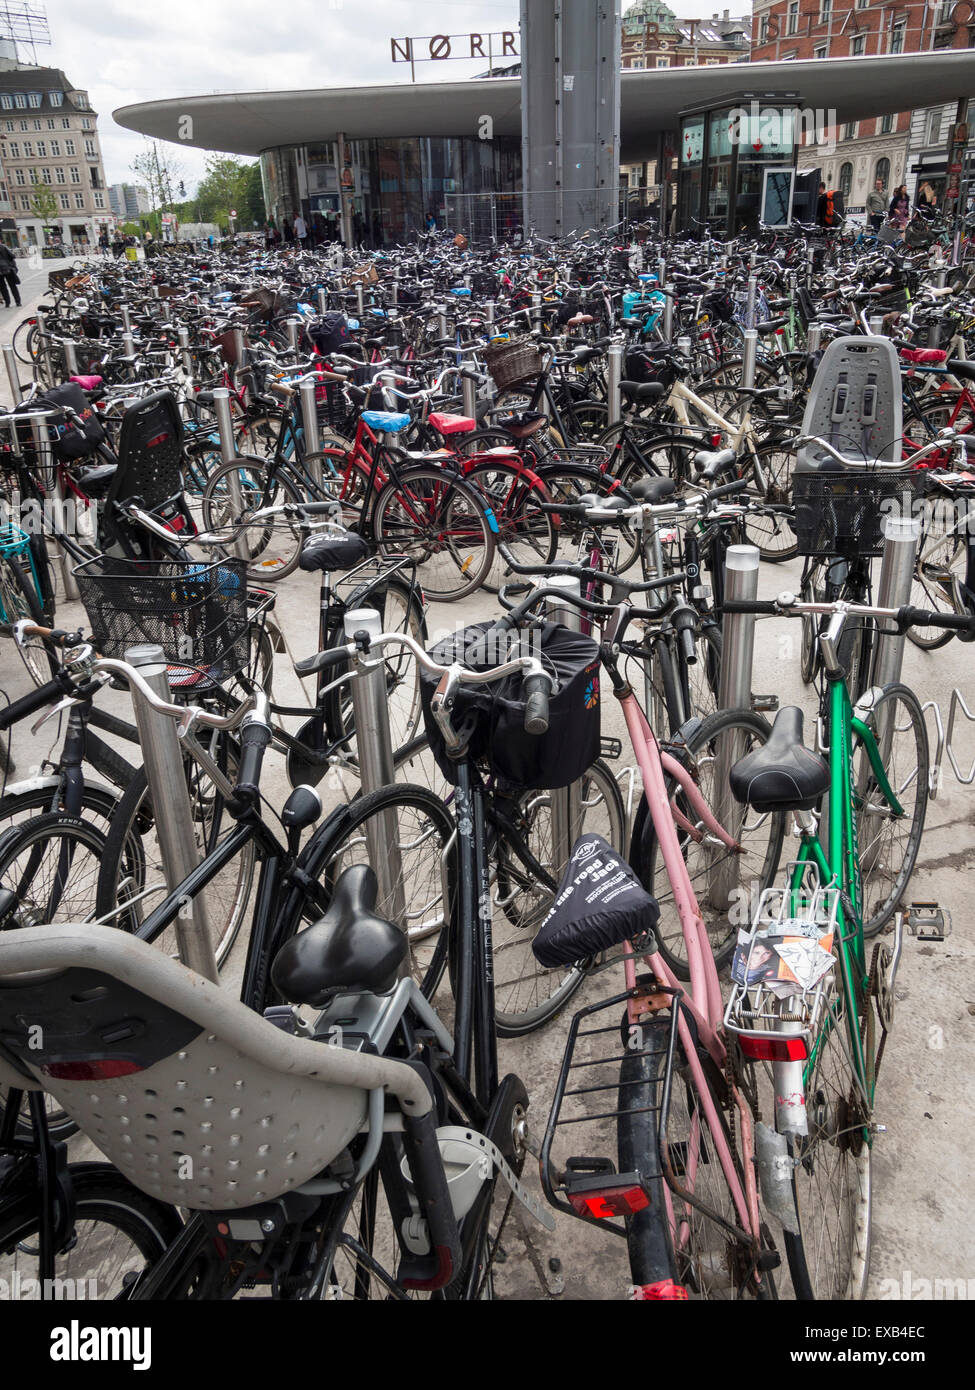 commuter and tourist cycles stored at Norreport metro station,Copenhagen,Denmark Stock Photo